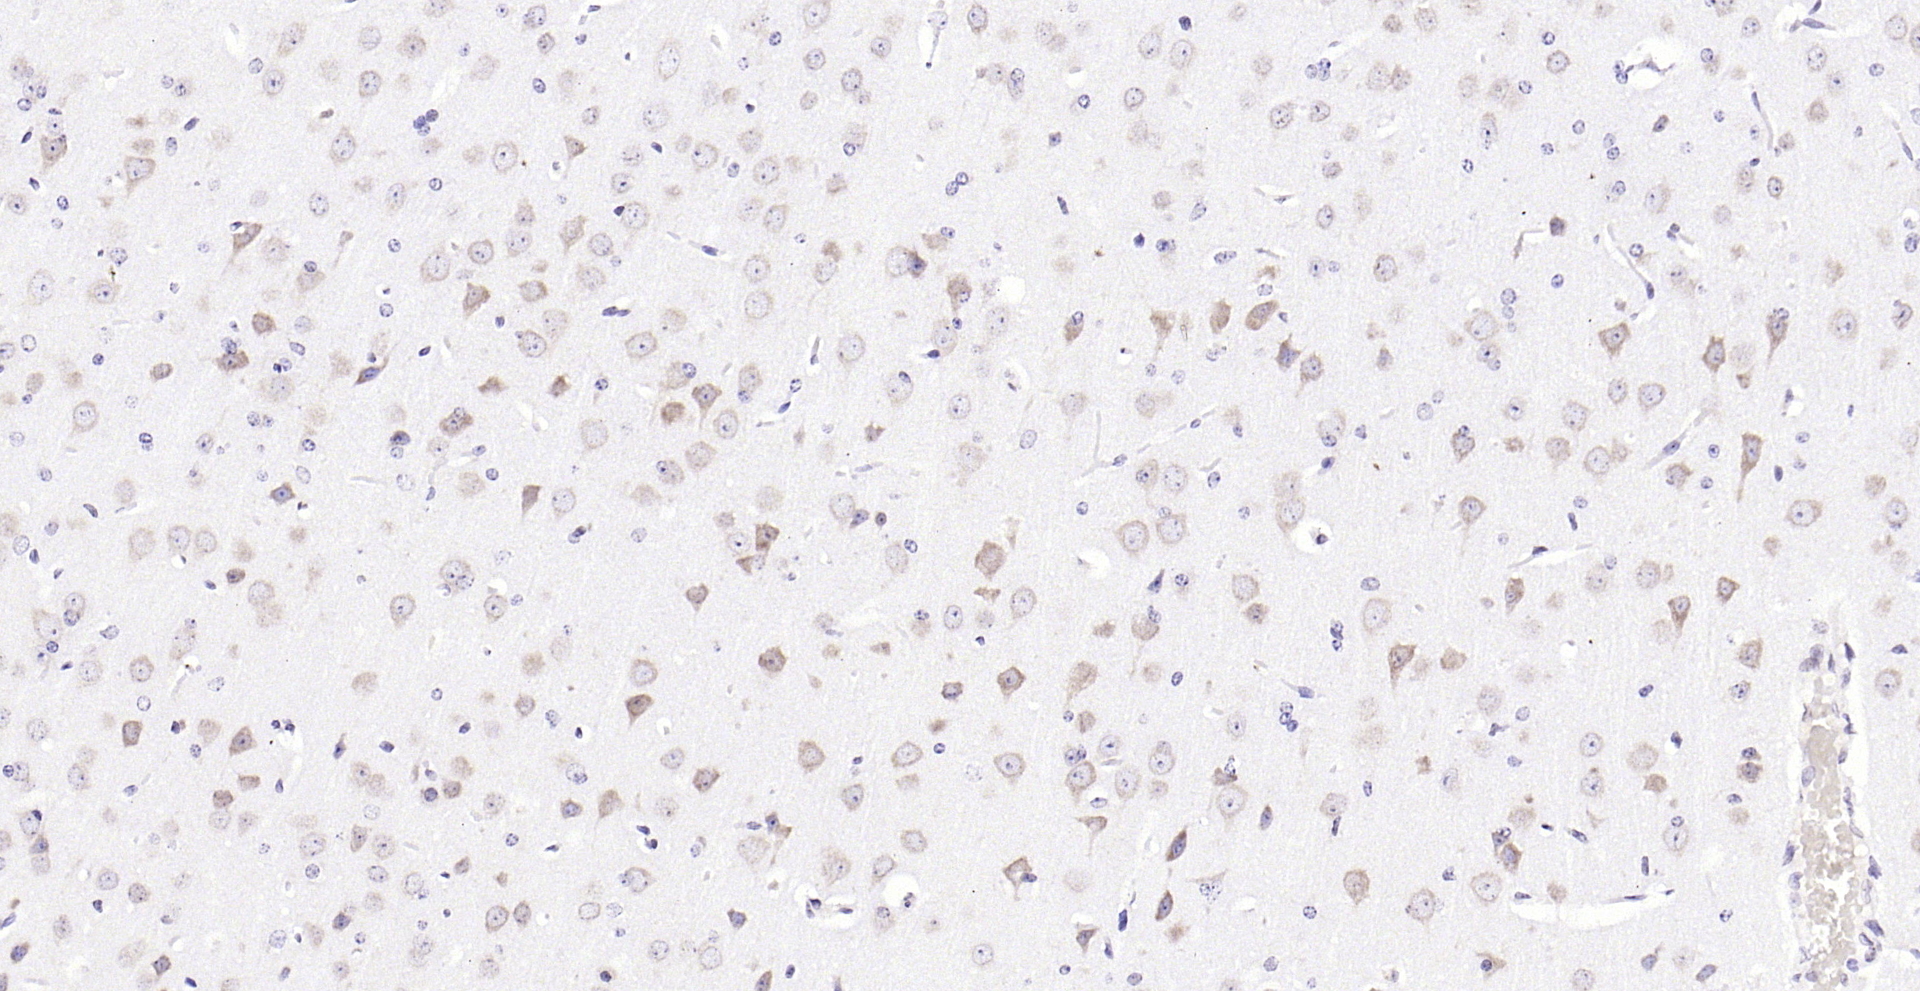 Paraformaldehyde-fixed, paraffin embedded (mouse brain); Antigen retrieval by boiling in sodium citrate buffer (pH6.0) for 15min; Block endogenous peroxidase by 3% hydrogen peroxide for 20 minutes; Blocking buffer (normal goat serum) at 37°C for 30min; Antibody incubation with (phospho-FMRP (Ser500)) Polyclonal Antibody, Unconjugated (bs-13188R) at 1:200 overnight at 4°C, followed by operating according to SP Kit(Rabbit) (sp-0023) instructionsand DAB staining.